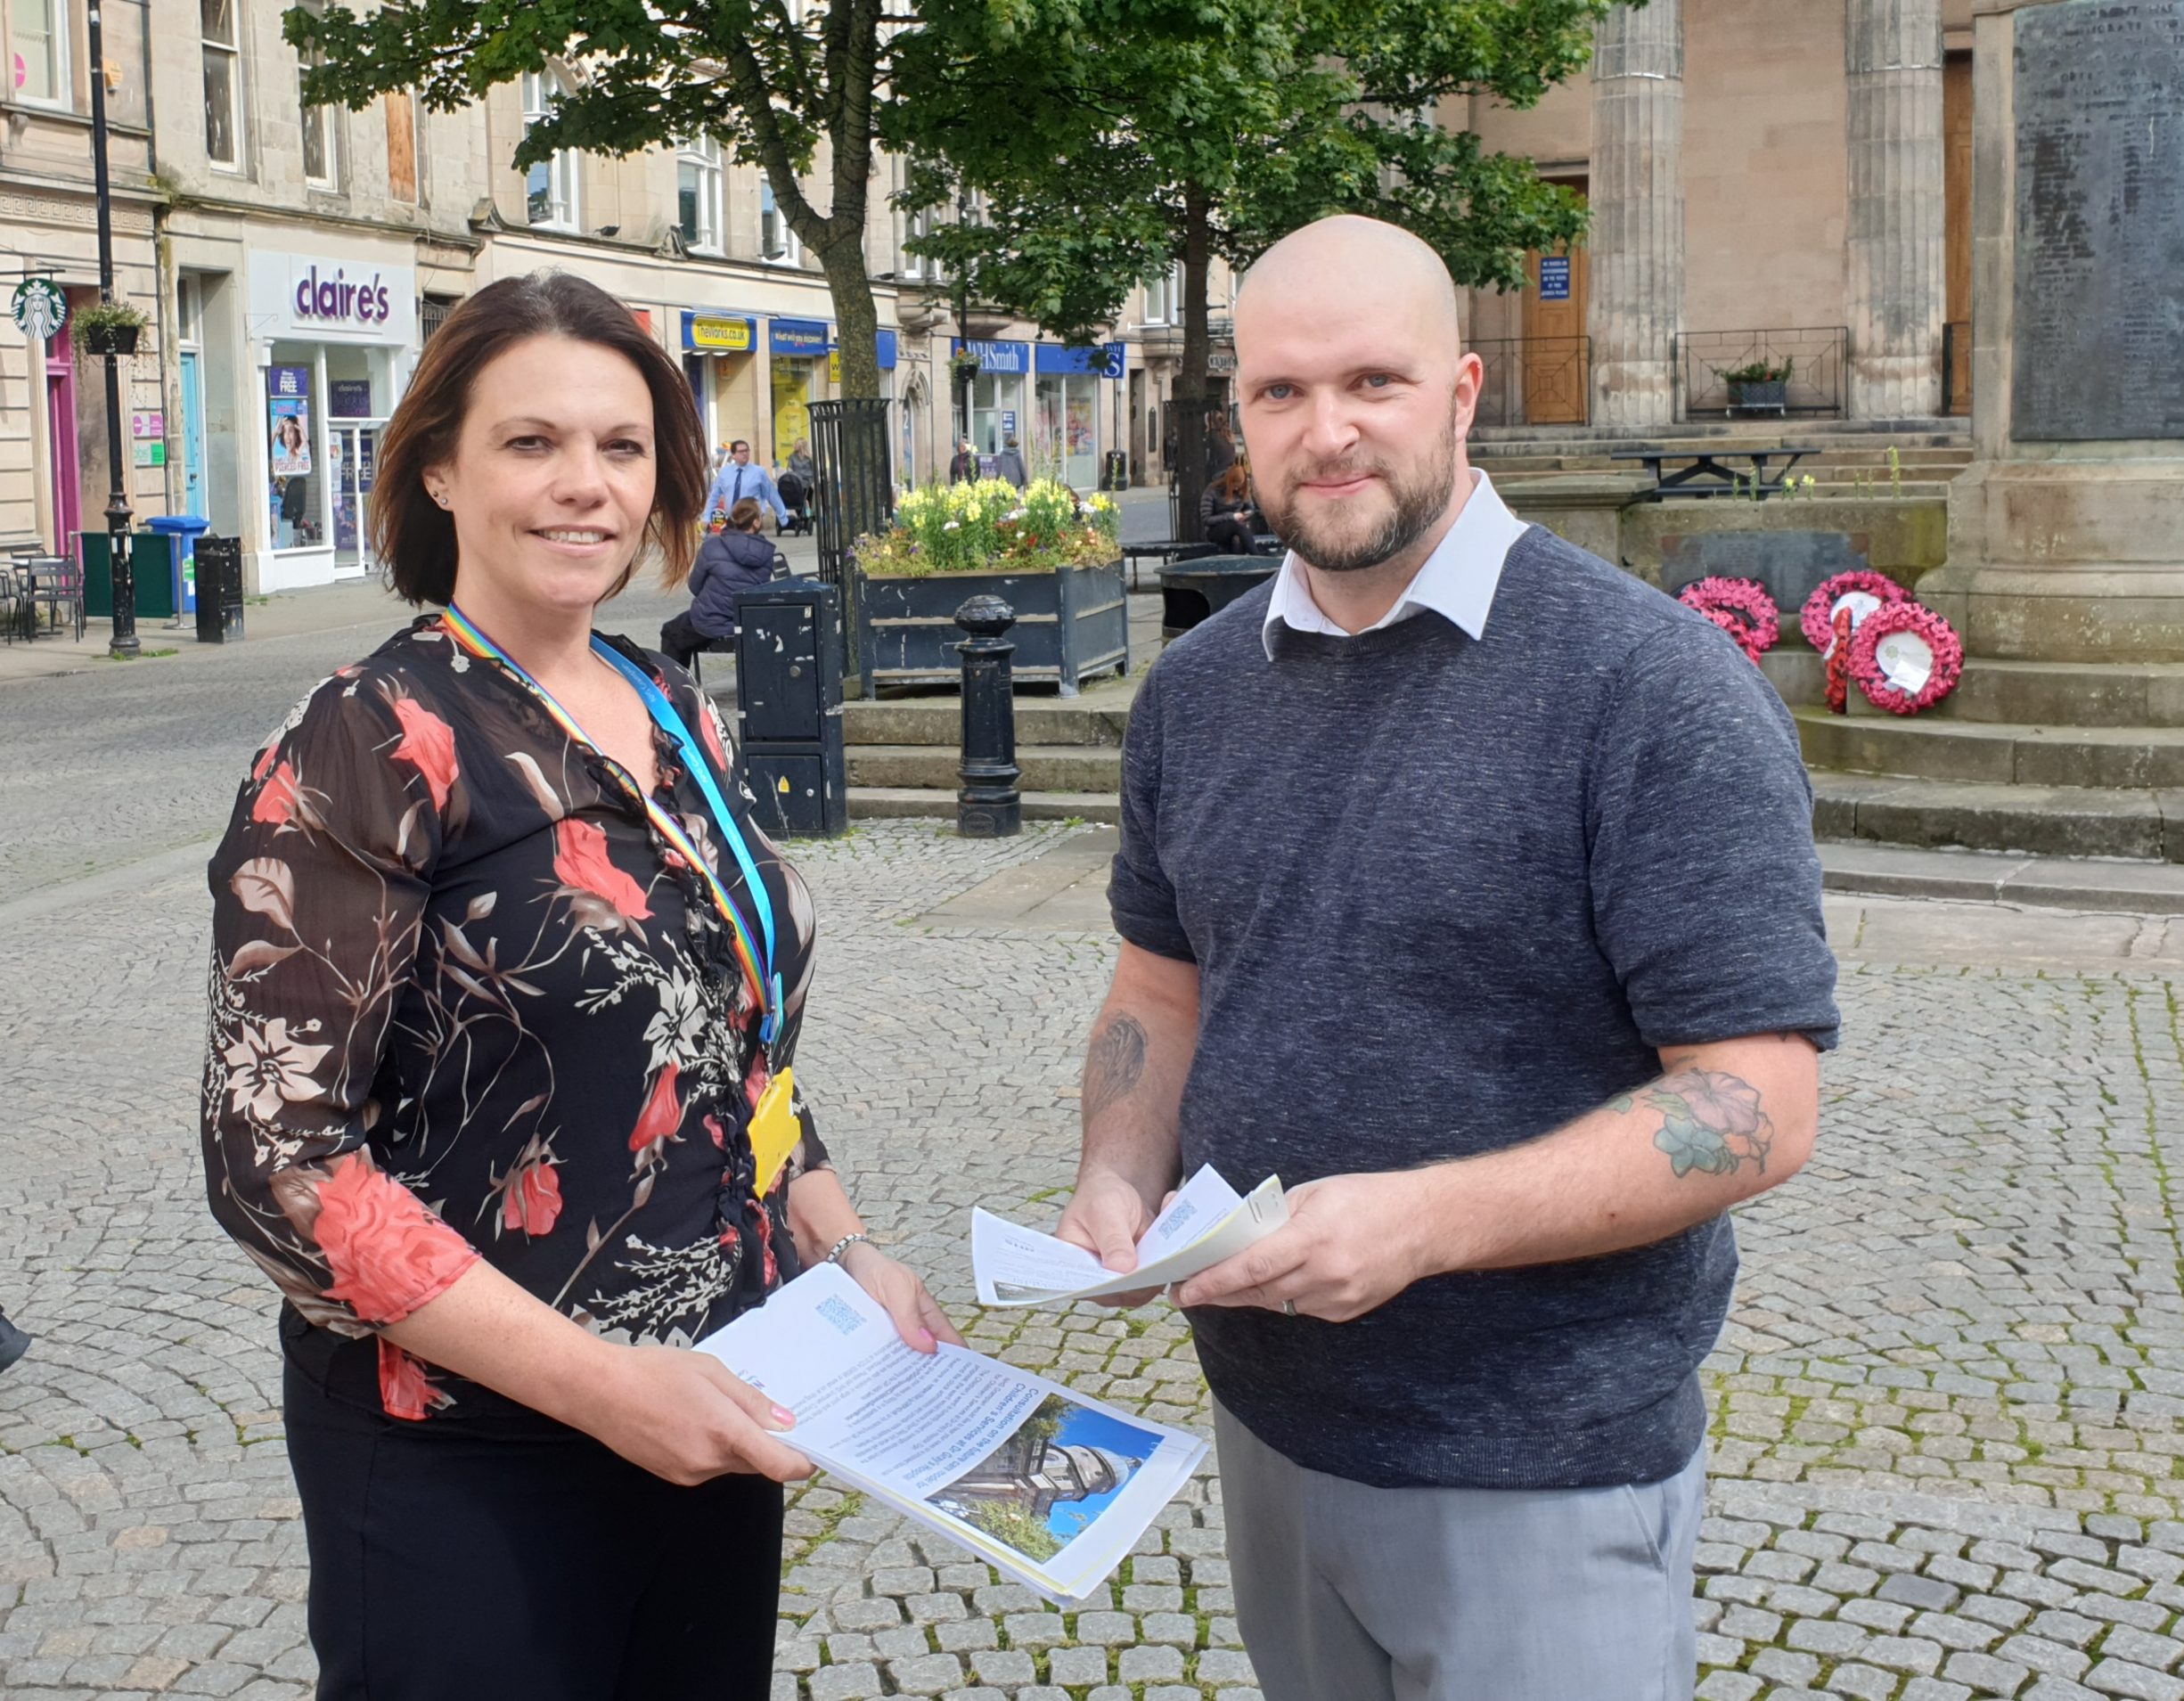 NHS Grampian's patient services manager Louise Ballantyne speaks with Lossiemouth resident Calum McKenzie.